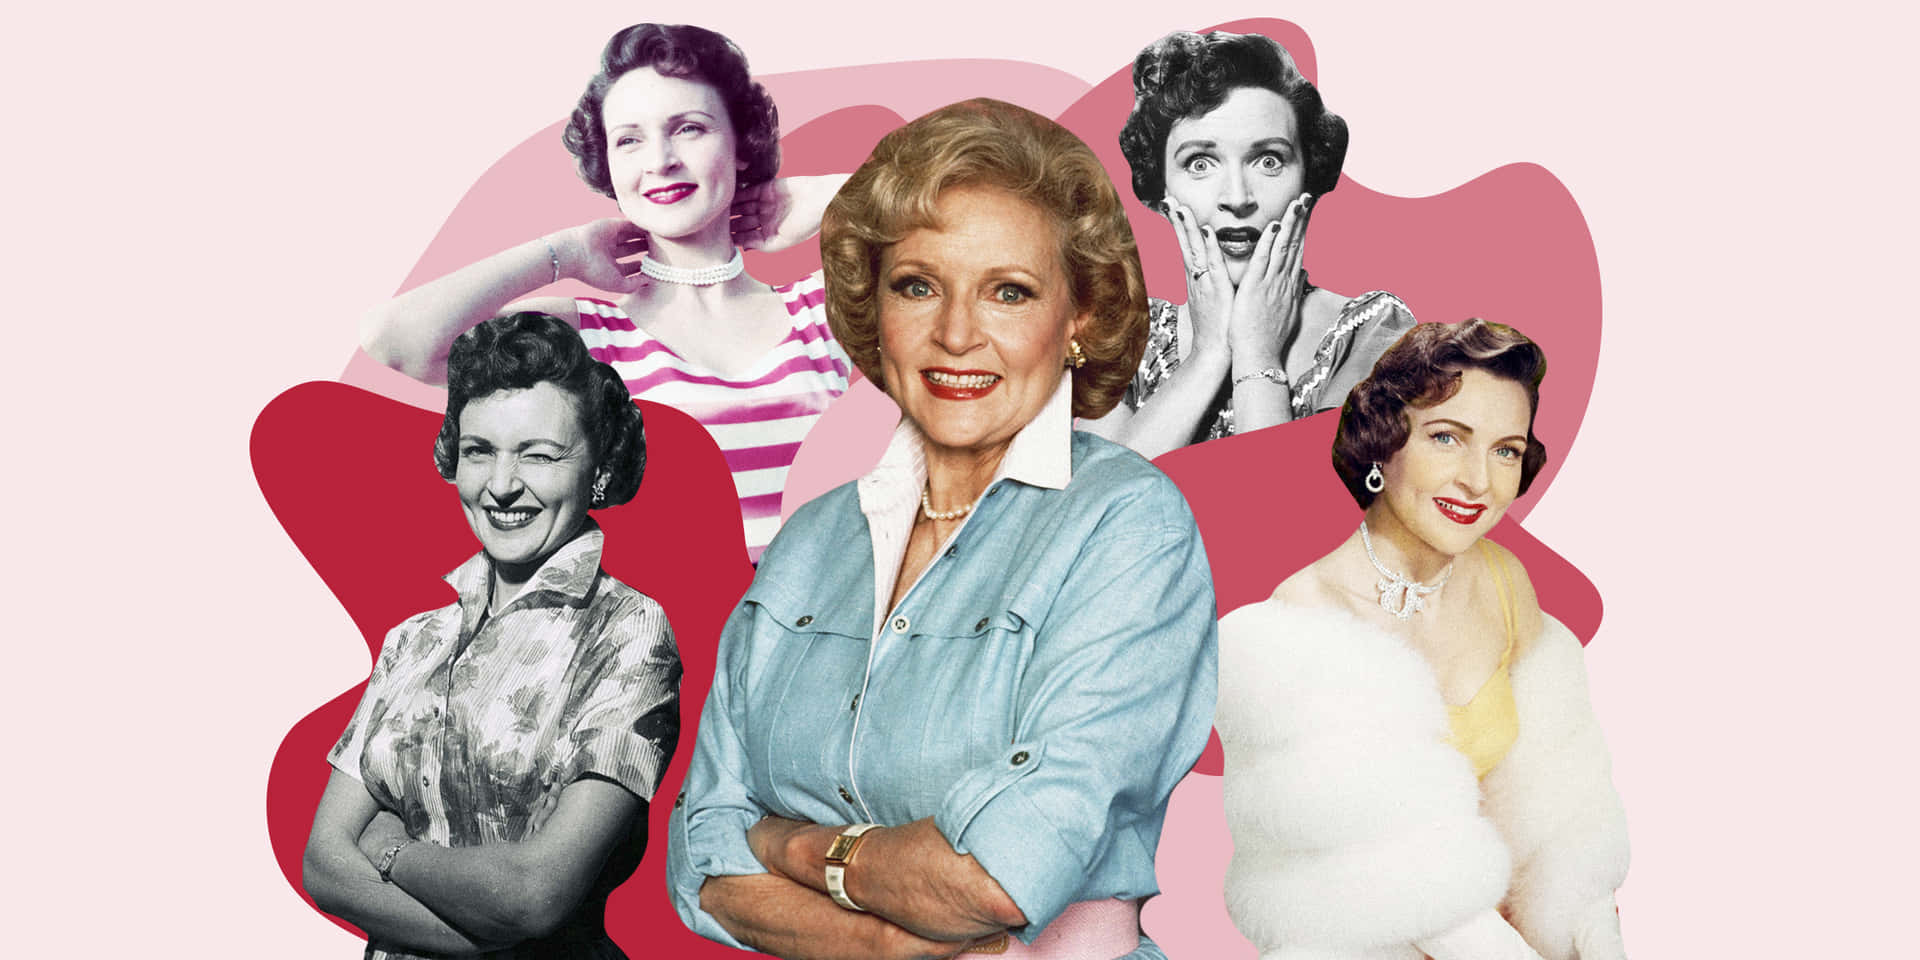 A smiling Betty White